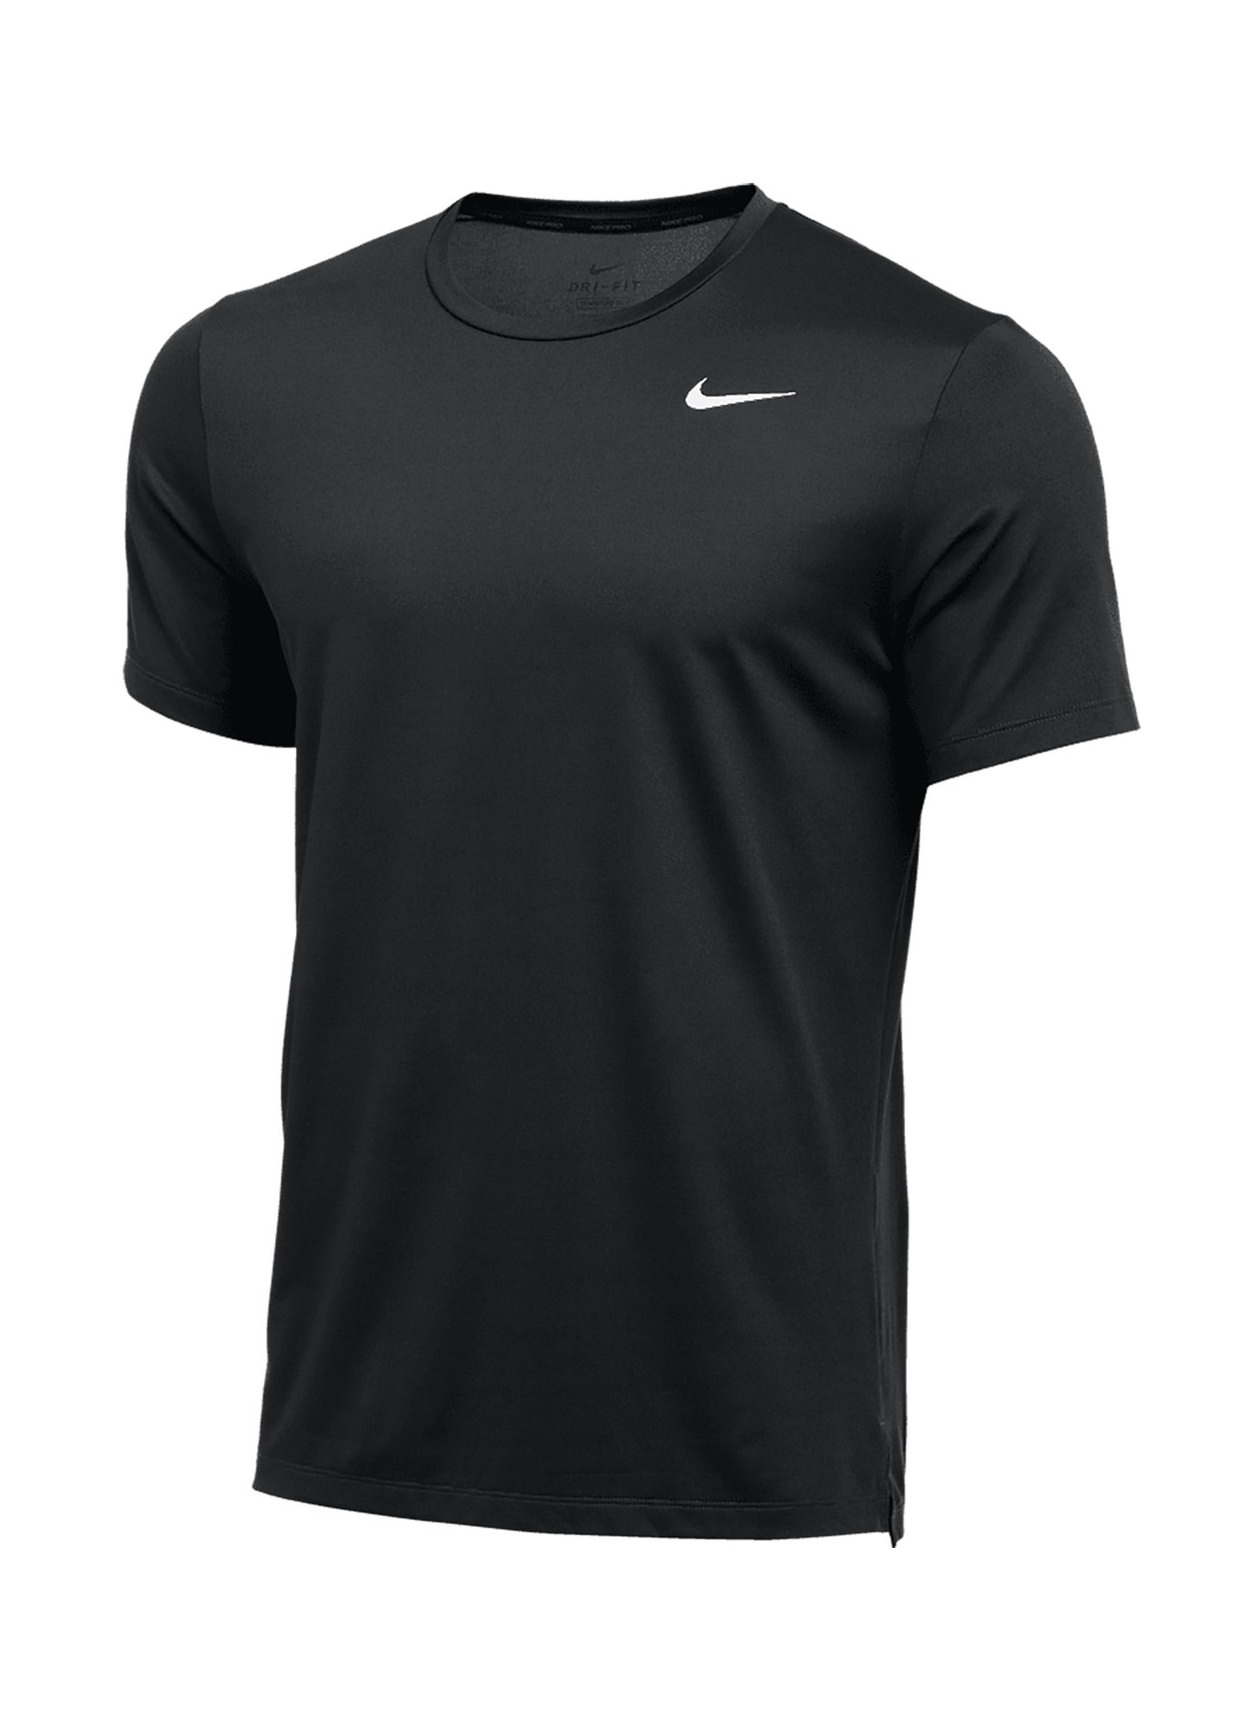 Shop Authentic Team-Issued Nike Pro Sports Apparel from Locker Room Direct